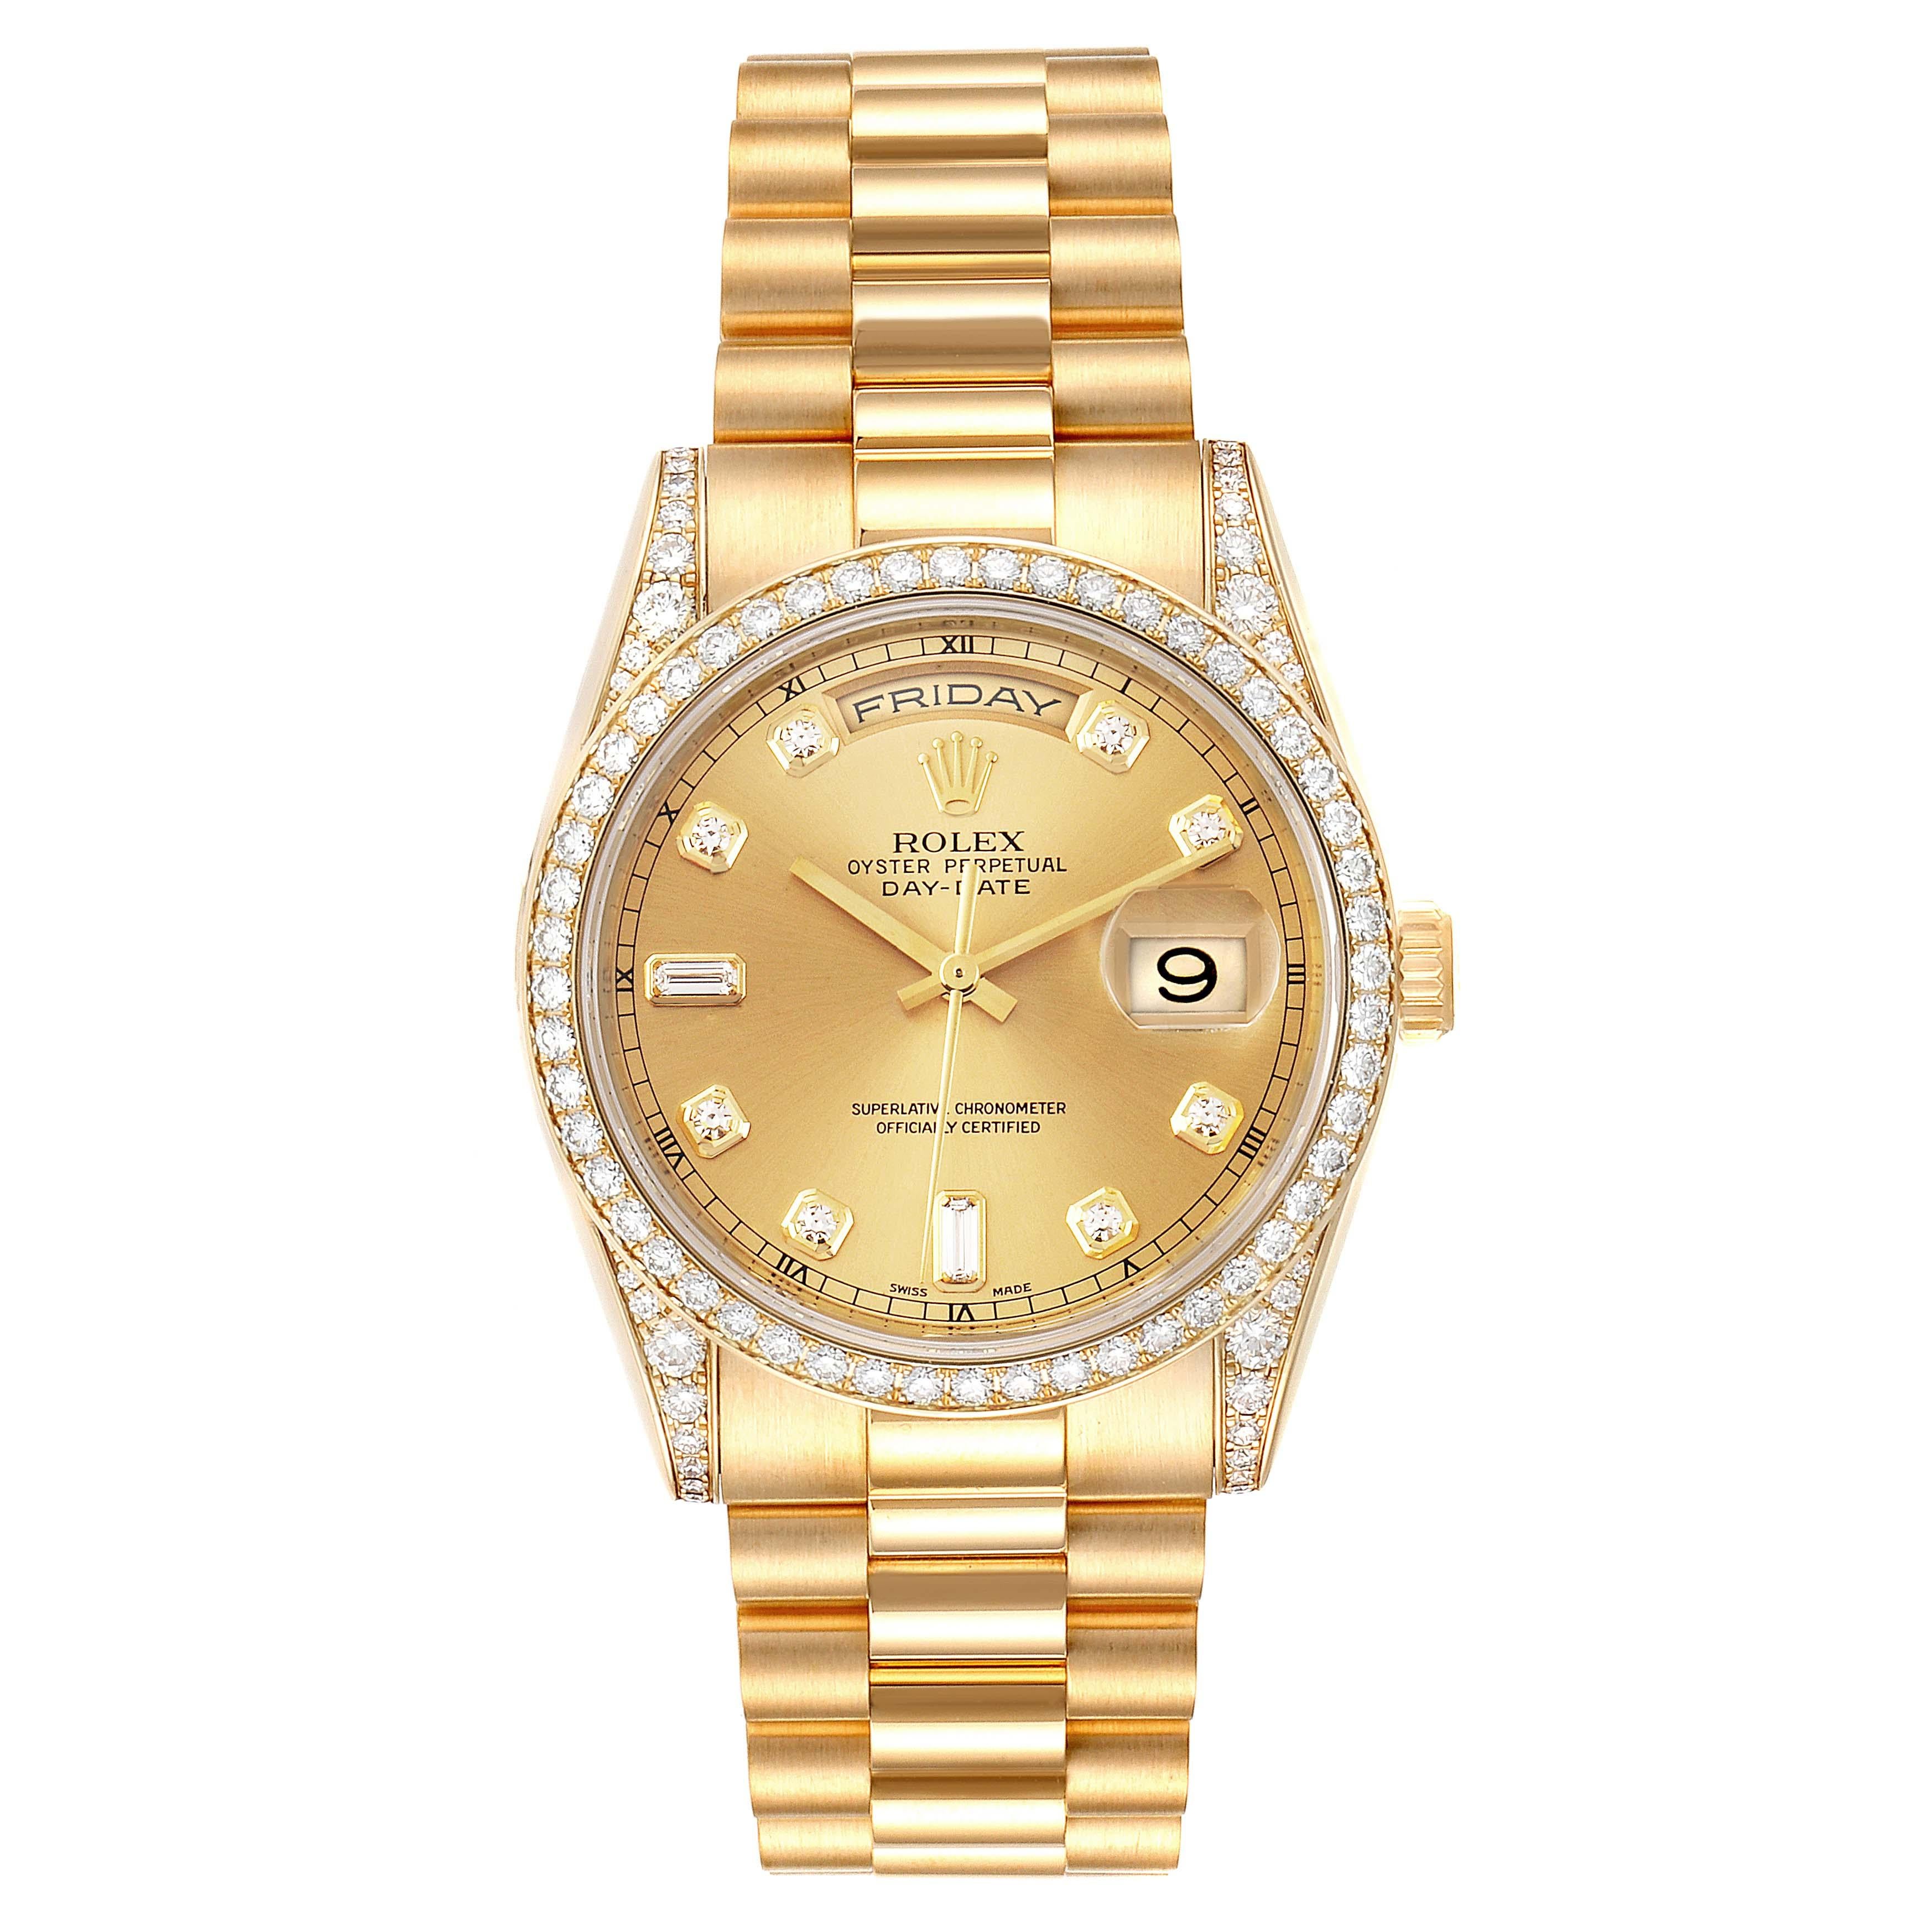 Rolex President Day-Date 36 Yellow Gold Diamond Mens Watch 118388. Officially certified chronometer self-winding movement. double quick set function. 18k yellow gold oyster case 36.0 mm in diameter. Rolex logo on a crown. Rolex factory diamond lugs.